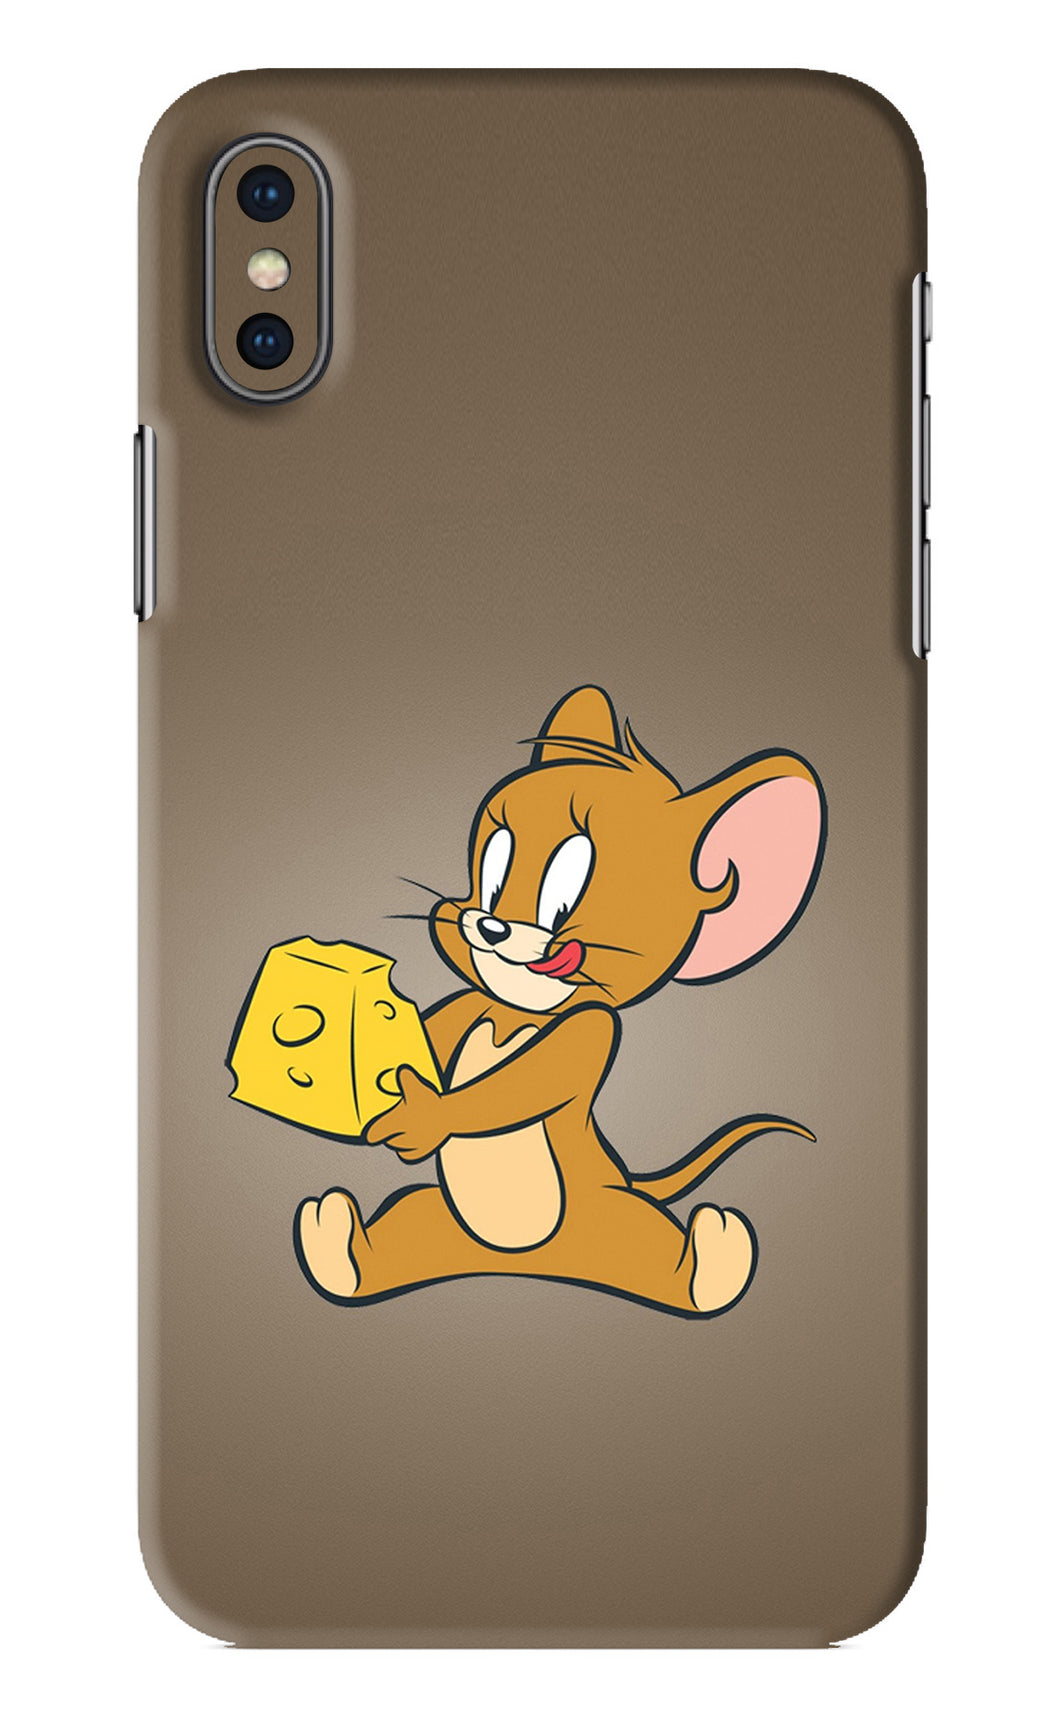 Jerry iPhone X Back Skin Wrap